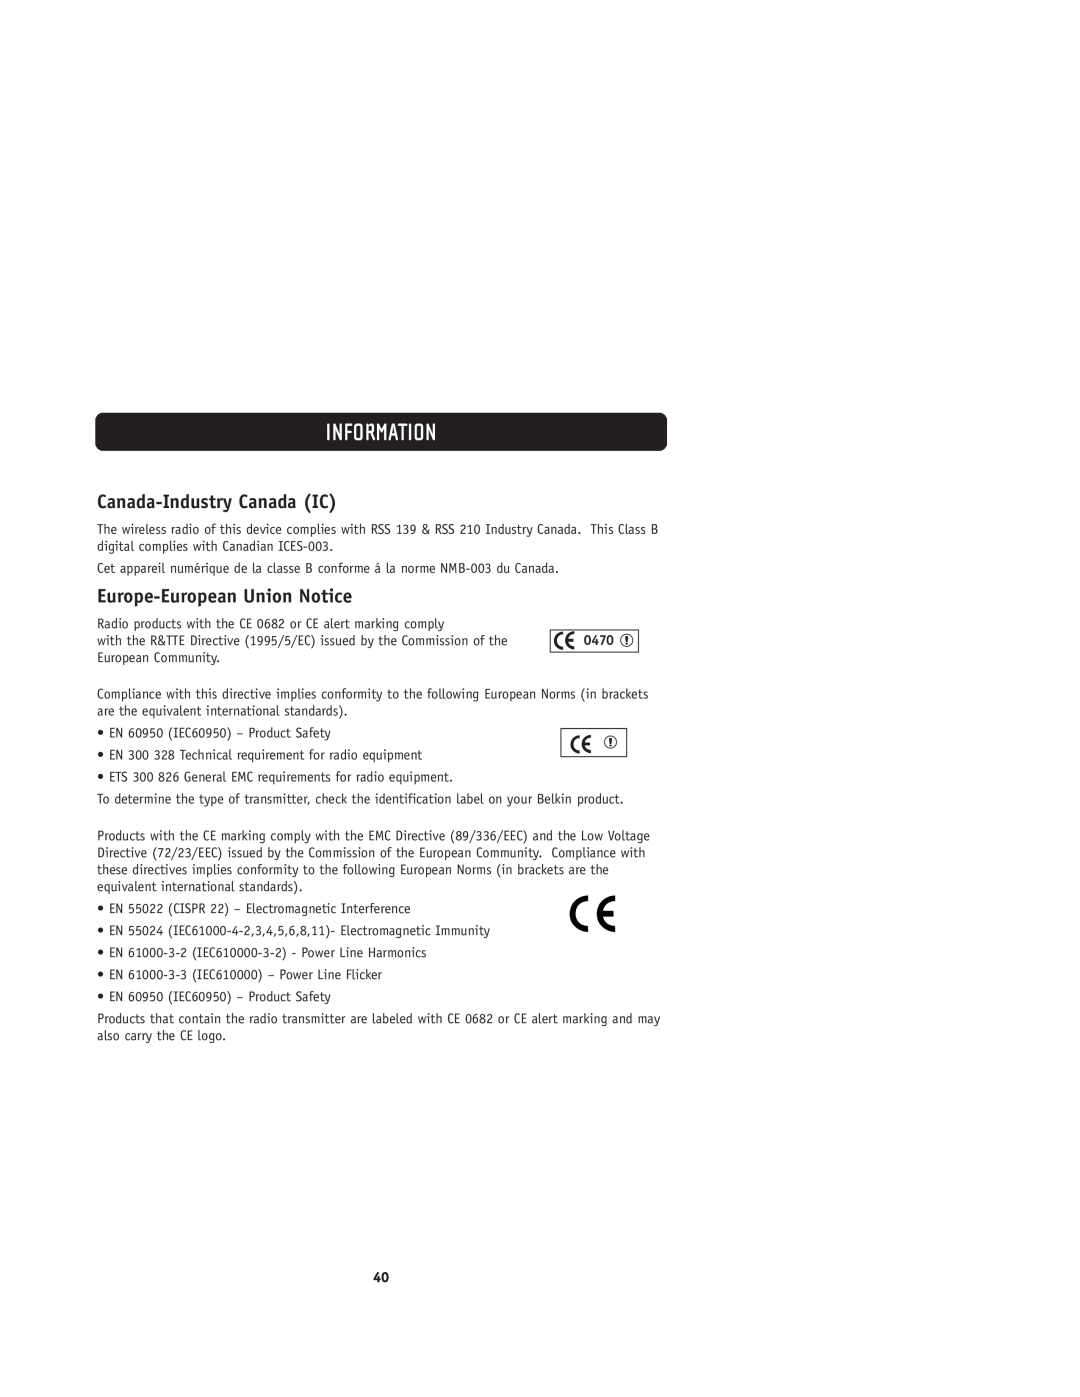 Belkin F1UP0001 user manual Canada-Industry Canada IC, Europe-European Union Notice, Information, 0470 